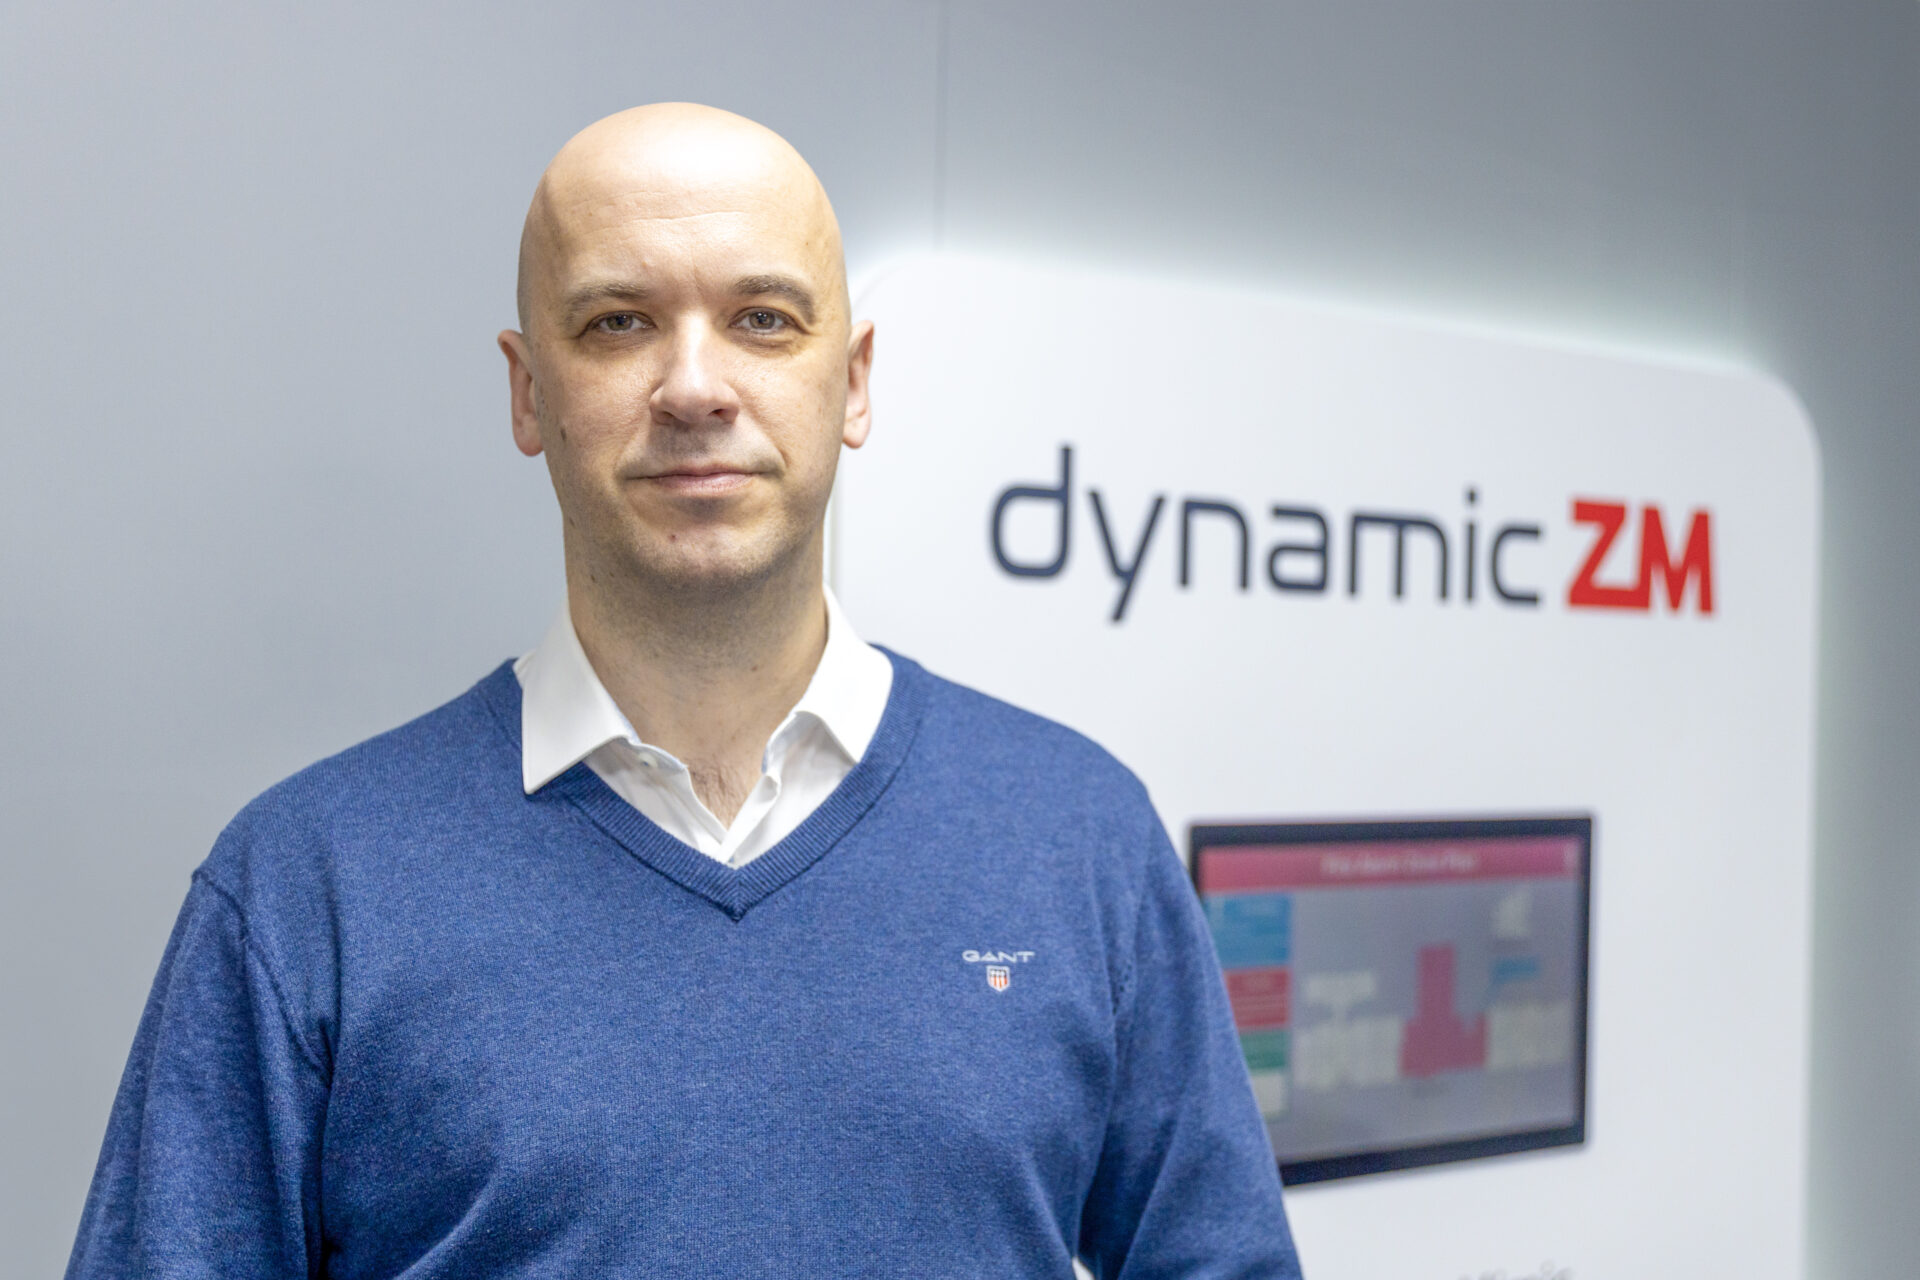 launched dynamiczm